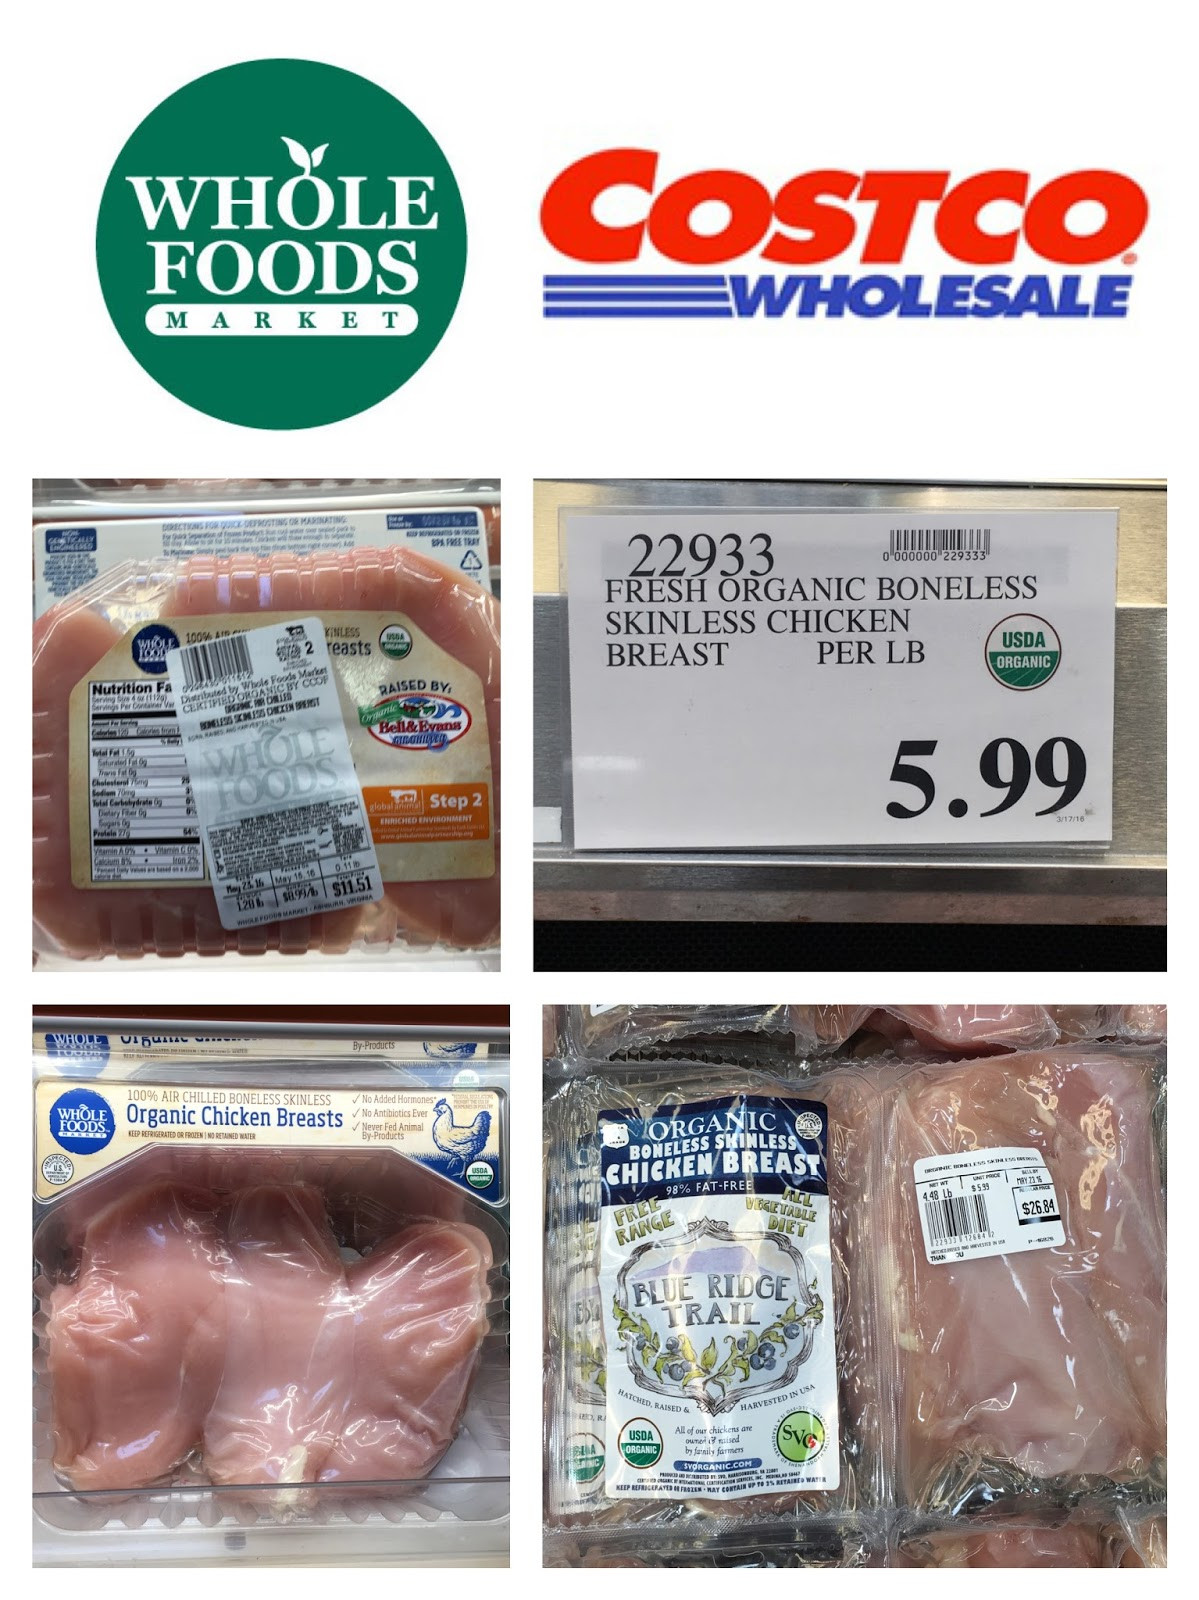 Whole Foods Chicken
 the Costco Connoisseur Costco vs Whole Foods and Tar